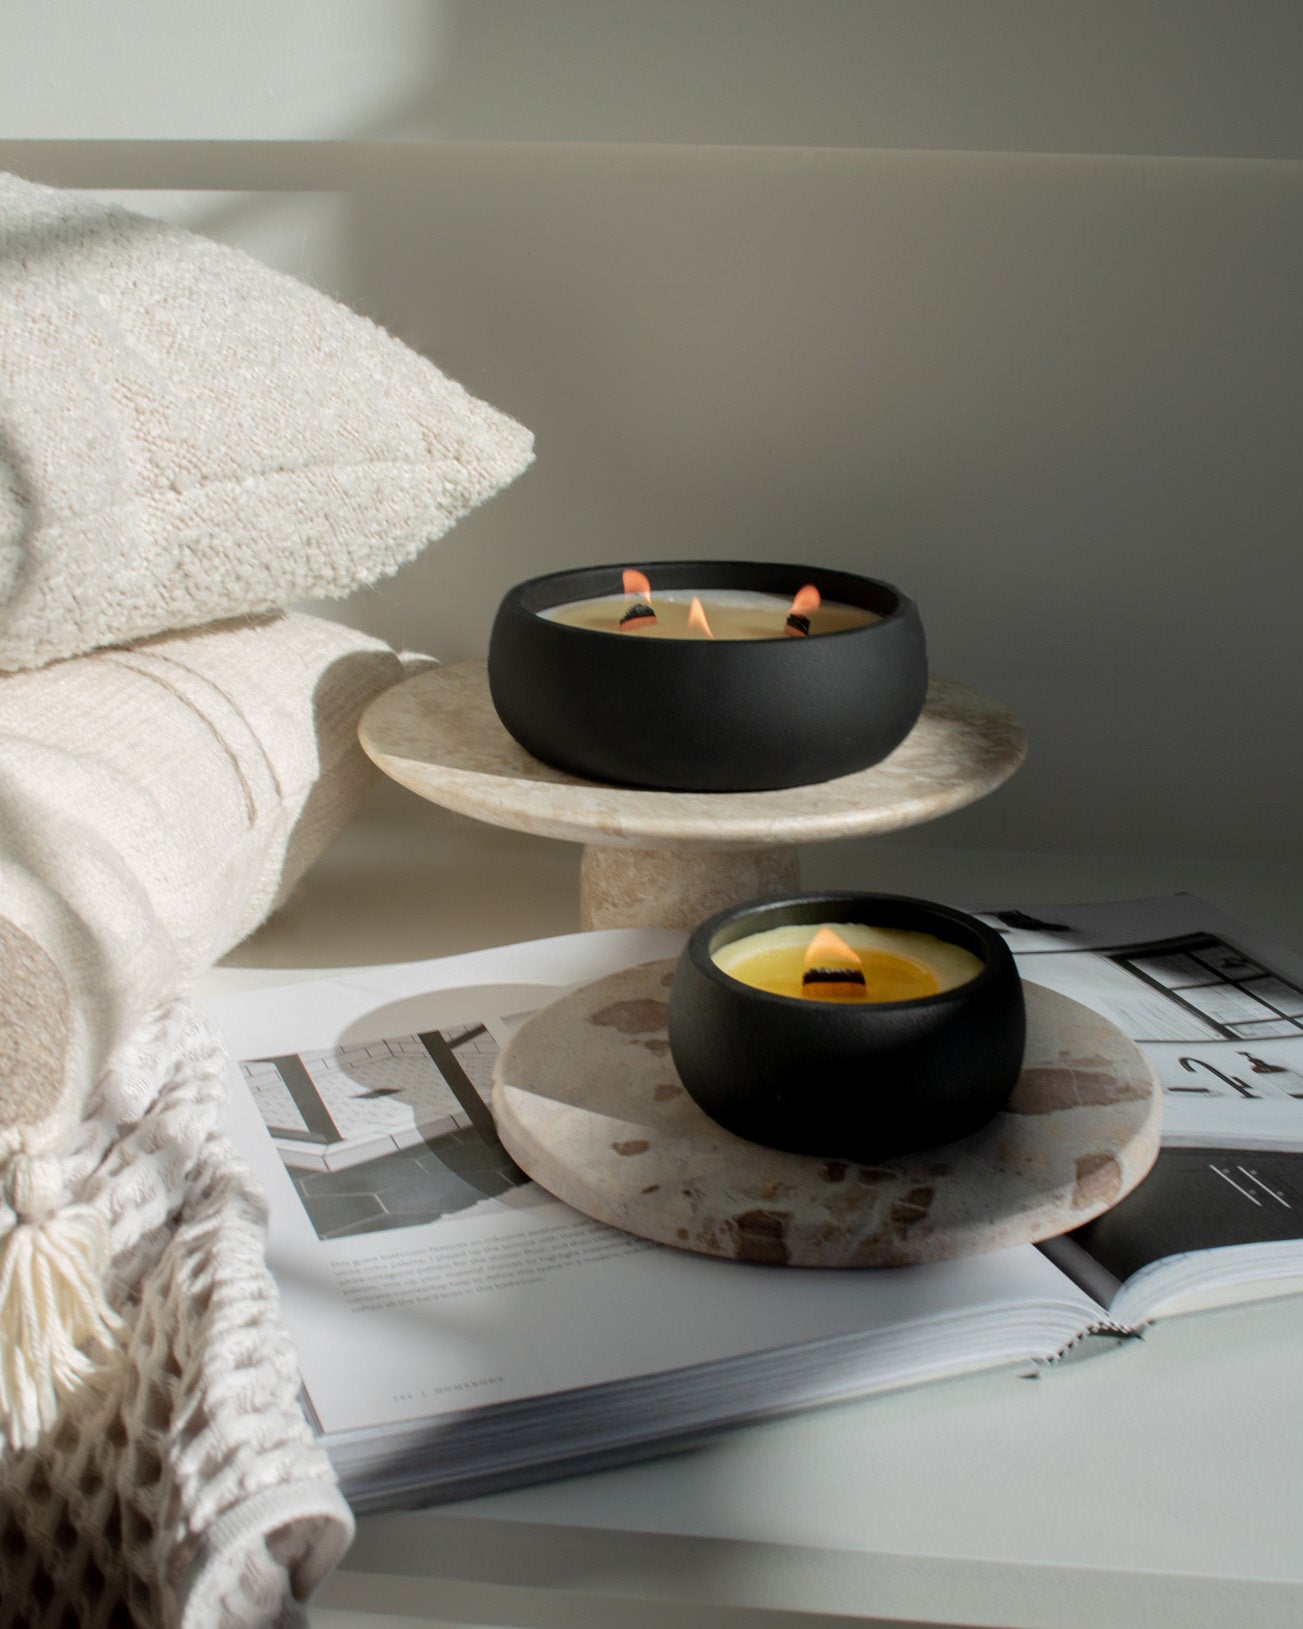 Spruce It Up Coconut Soy Candle - Black Concrete Wooden Wick Vessel